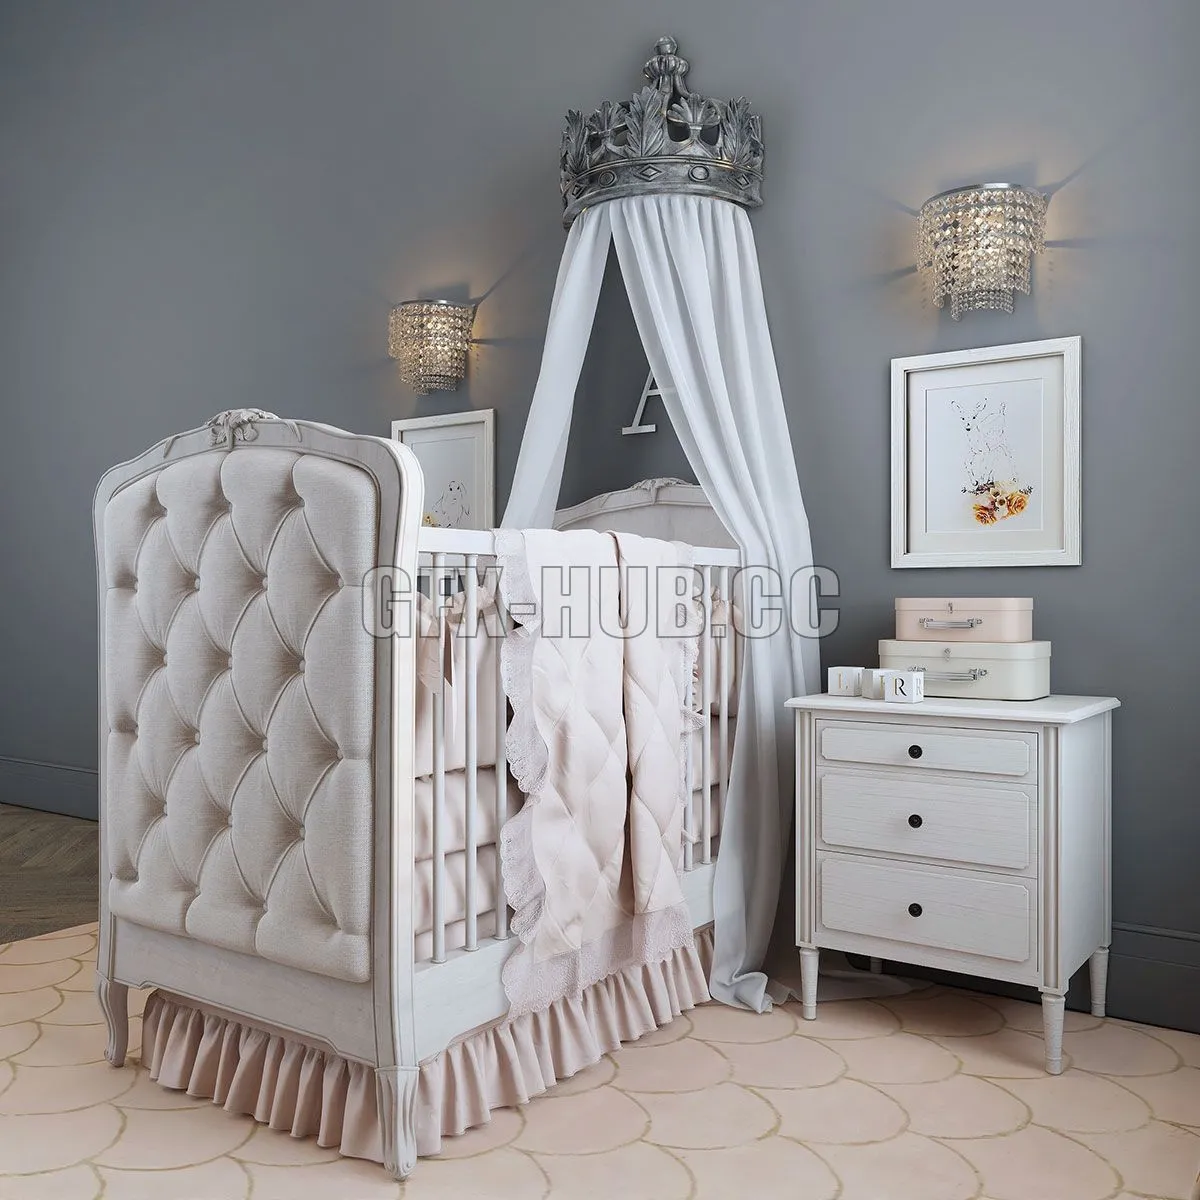 FURNITURE 3D MODELS – RH BED COLETTE TUFTED CRIB with decor